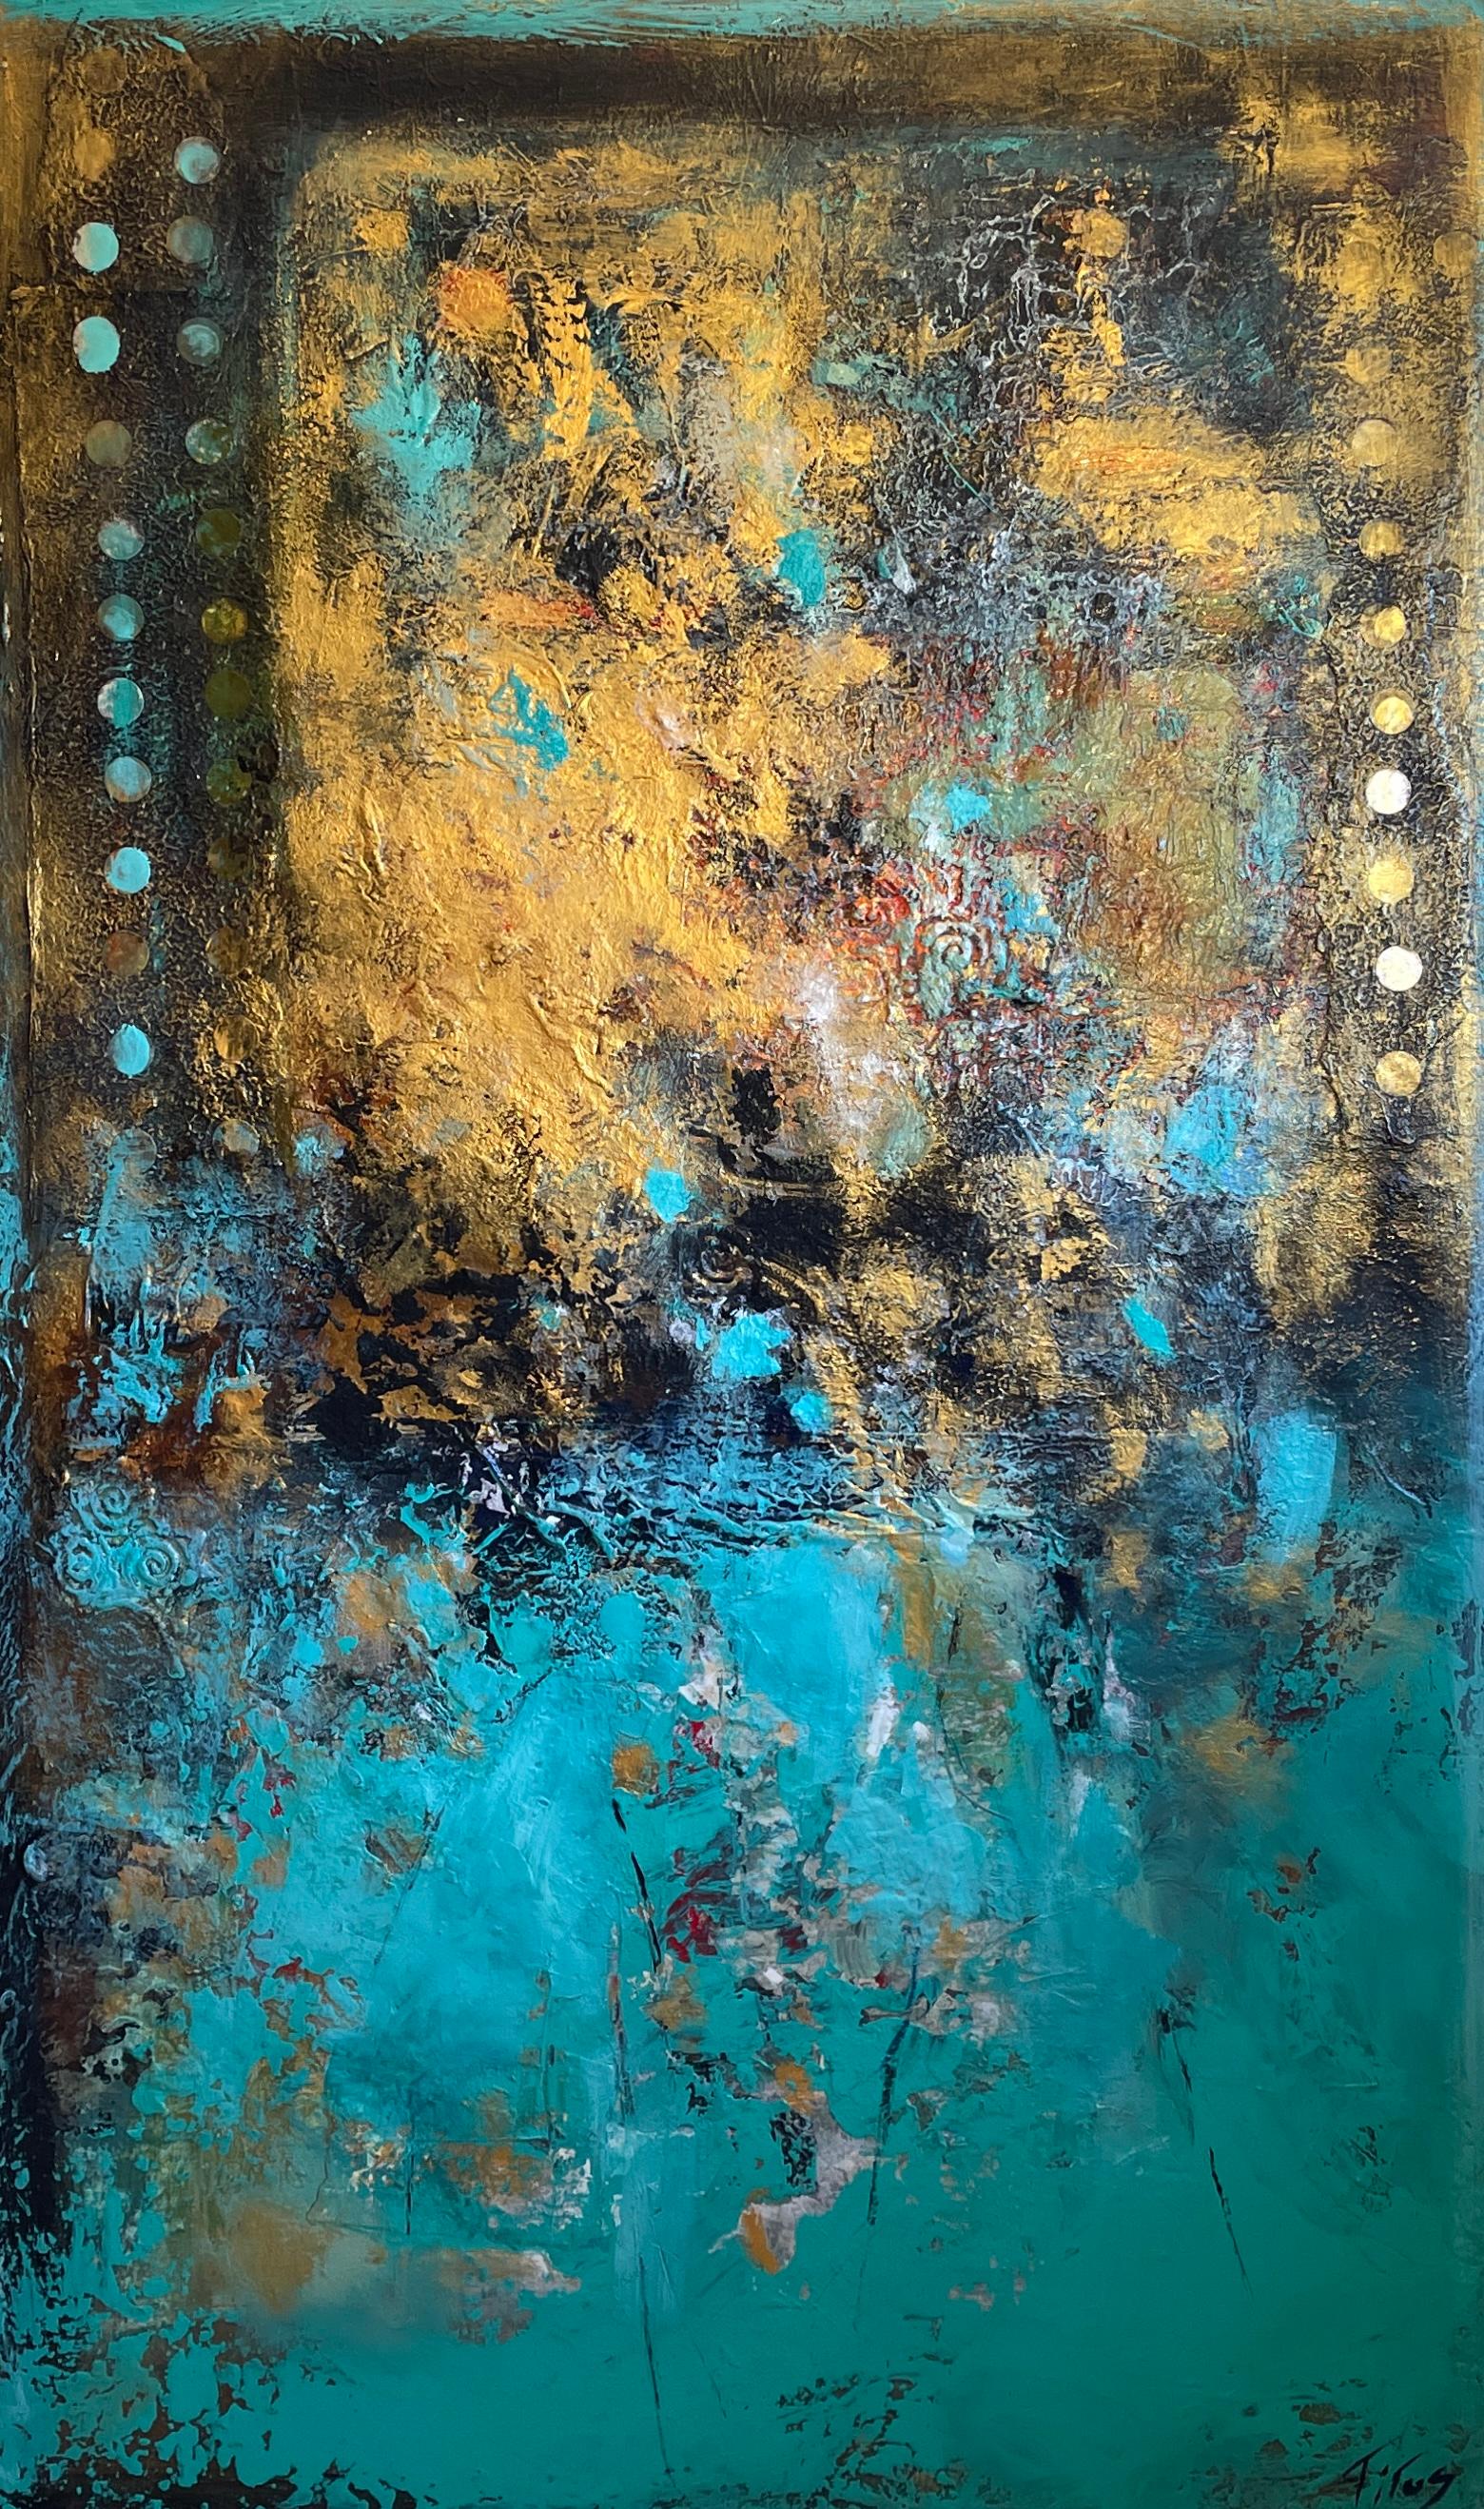 "Full Circle" by Mary Titus is a dynamic 60" x 36" acrylic and mixed media canvas that showcases the essence of abstract expressionism. This piece is awash with a symphony of golds and teals, creating an underwater treasure-like illusion. The